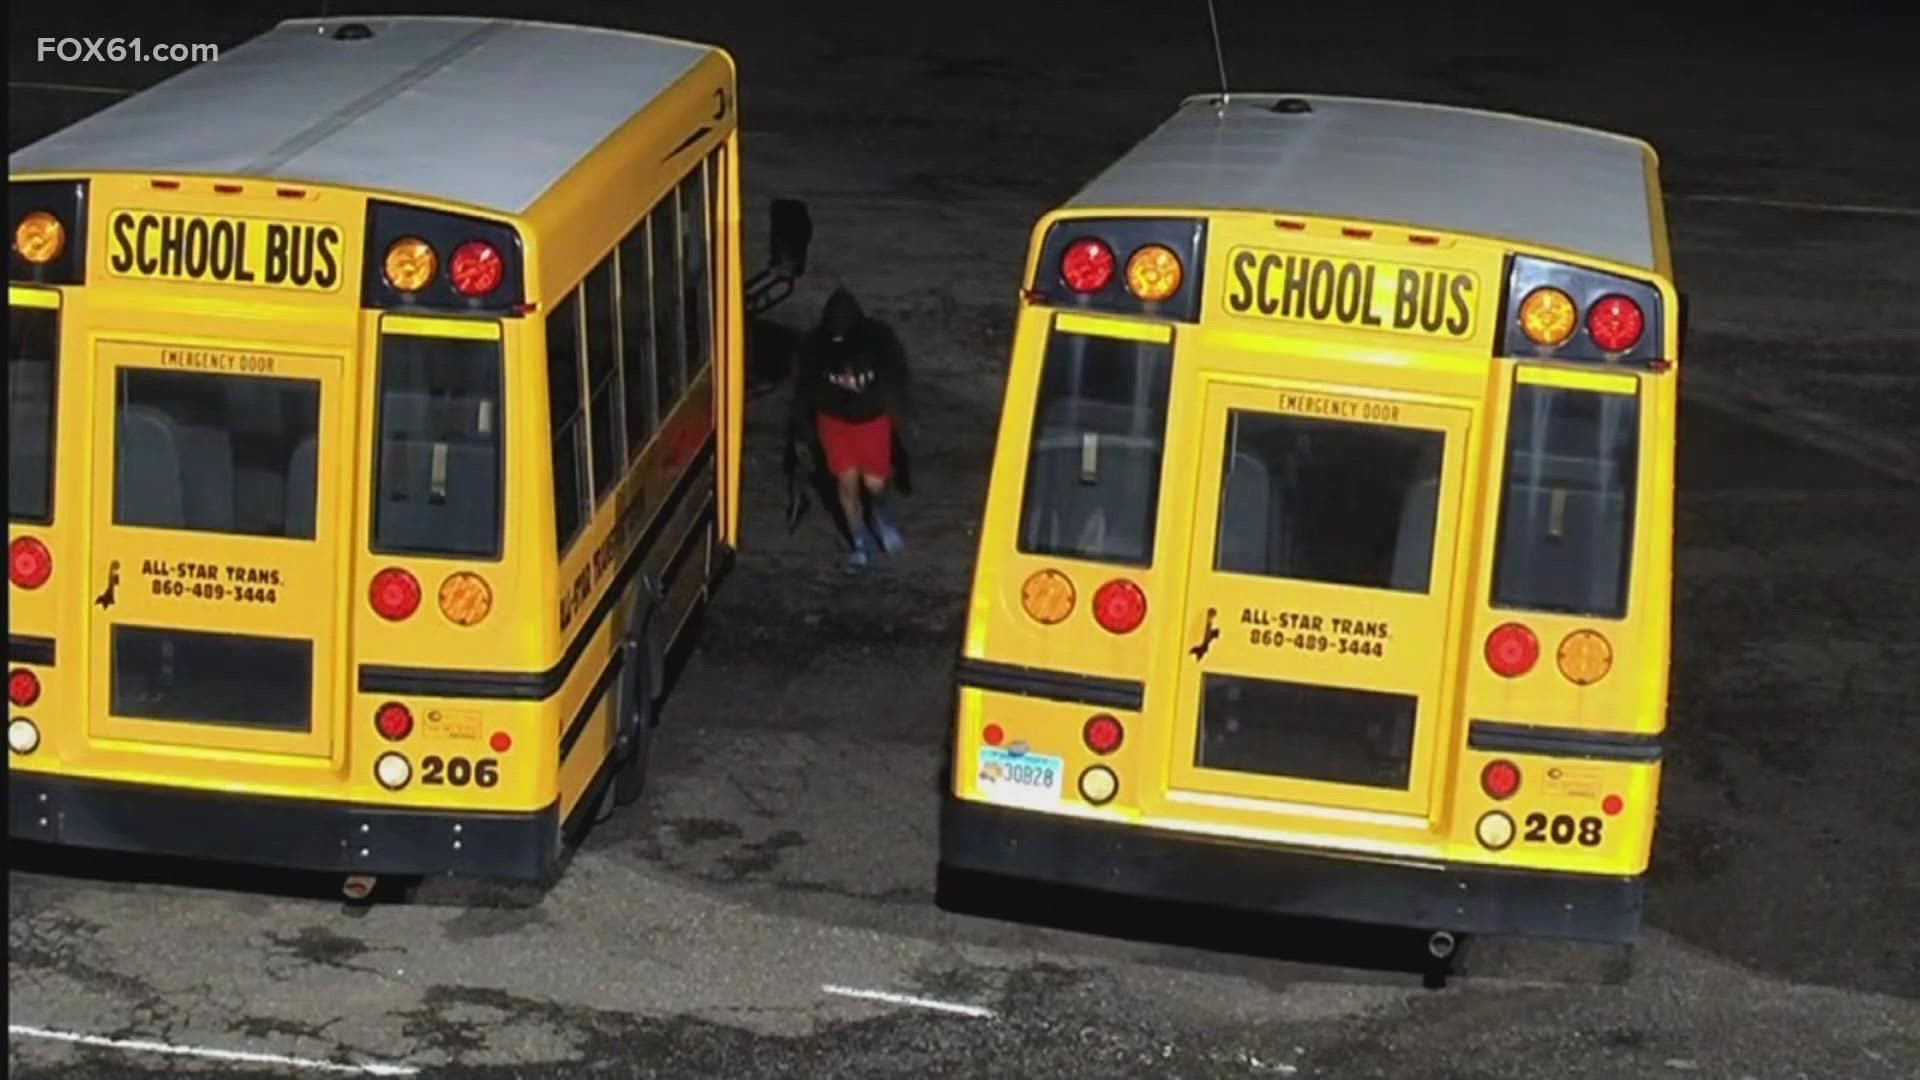 7 school buses have been targeted by catalytic converter thieves.